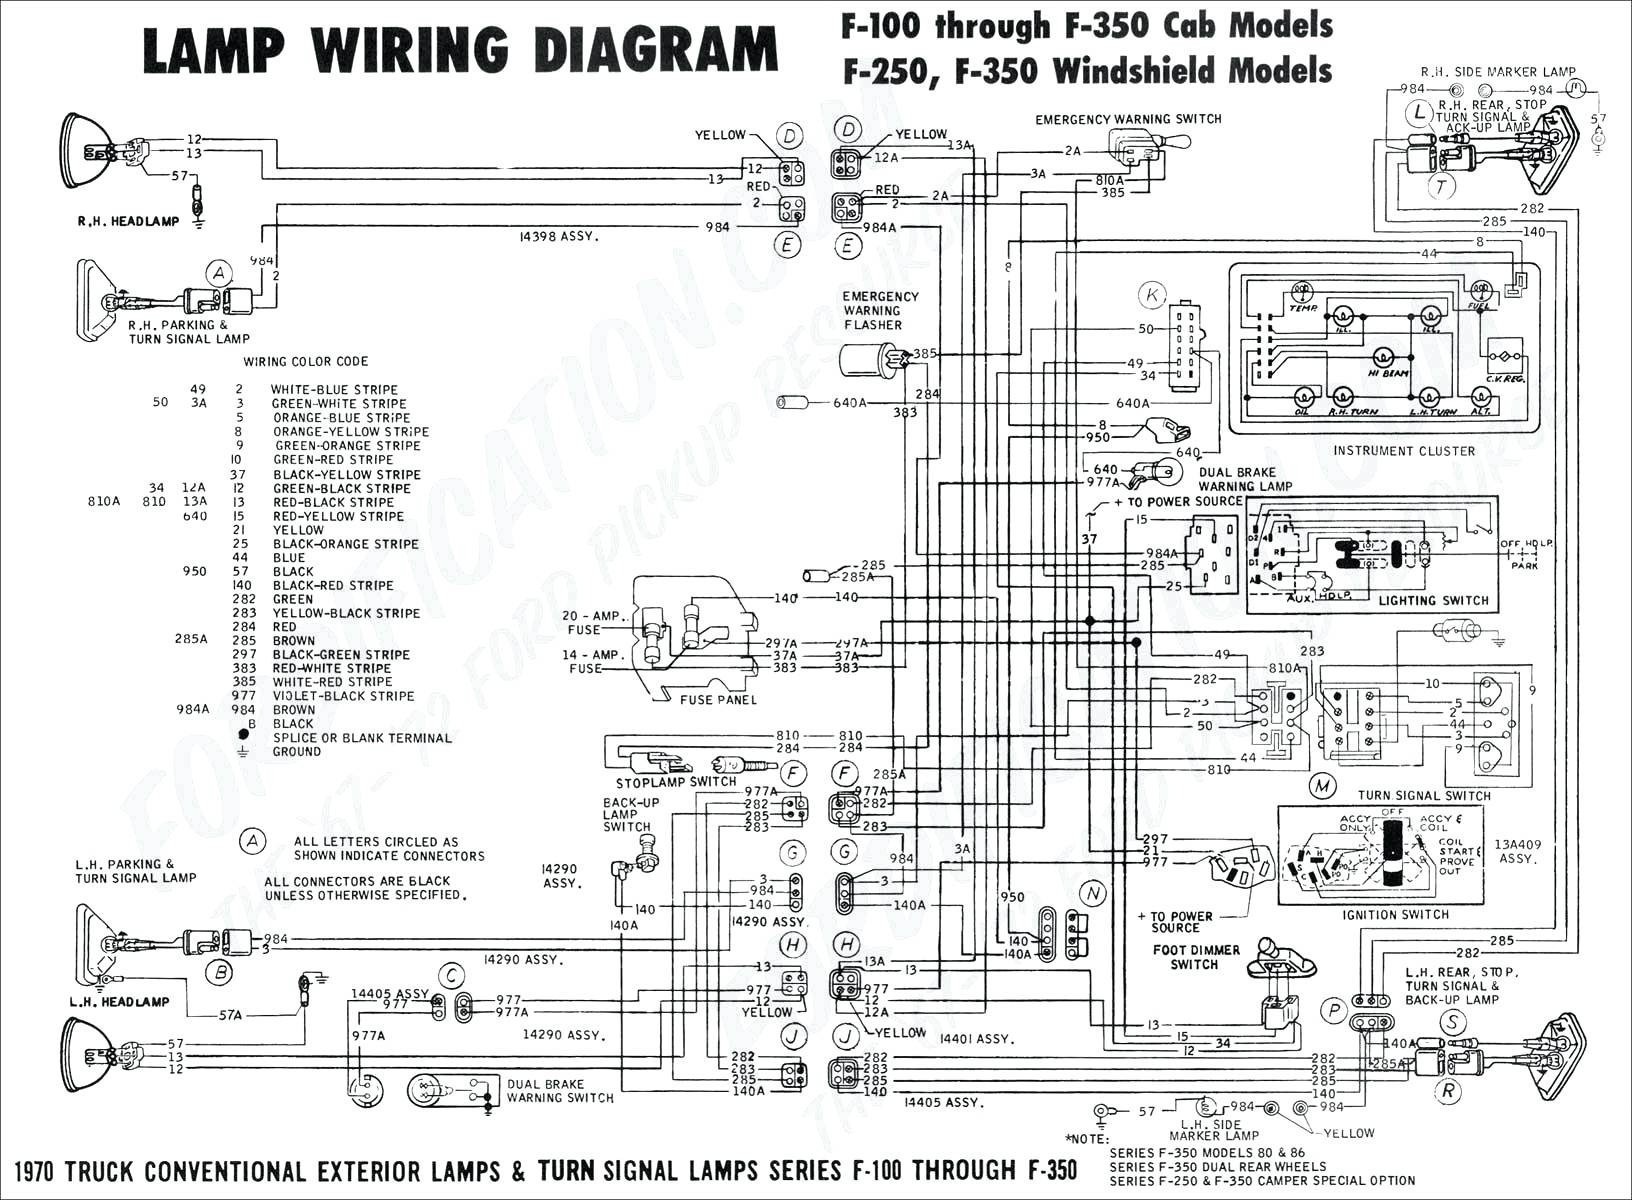 5 Wire Trailer Wiring Diagram Wiring Diagram towing socket Refrence 5 Wire Trailer Plug Diagram Of 5 Wire Trailer Wiring Diagram